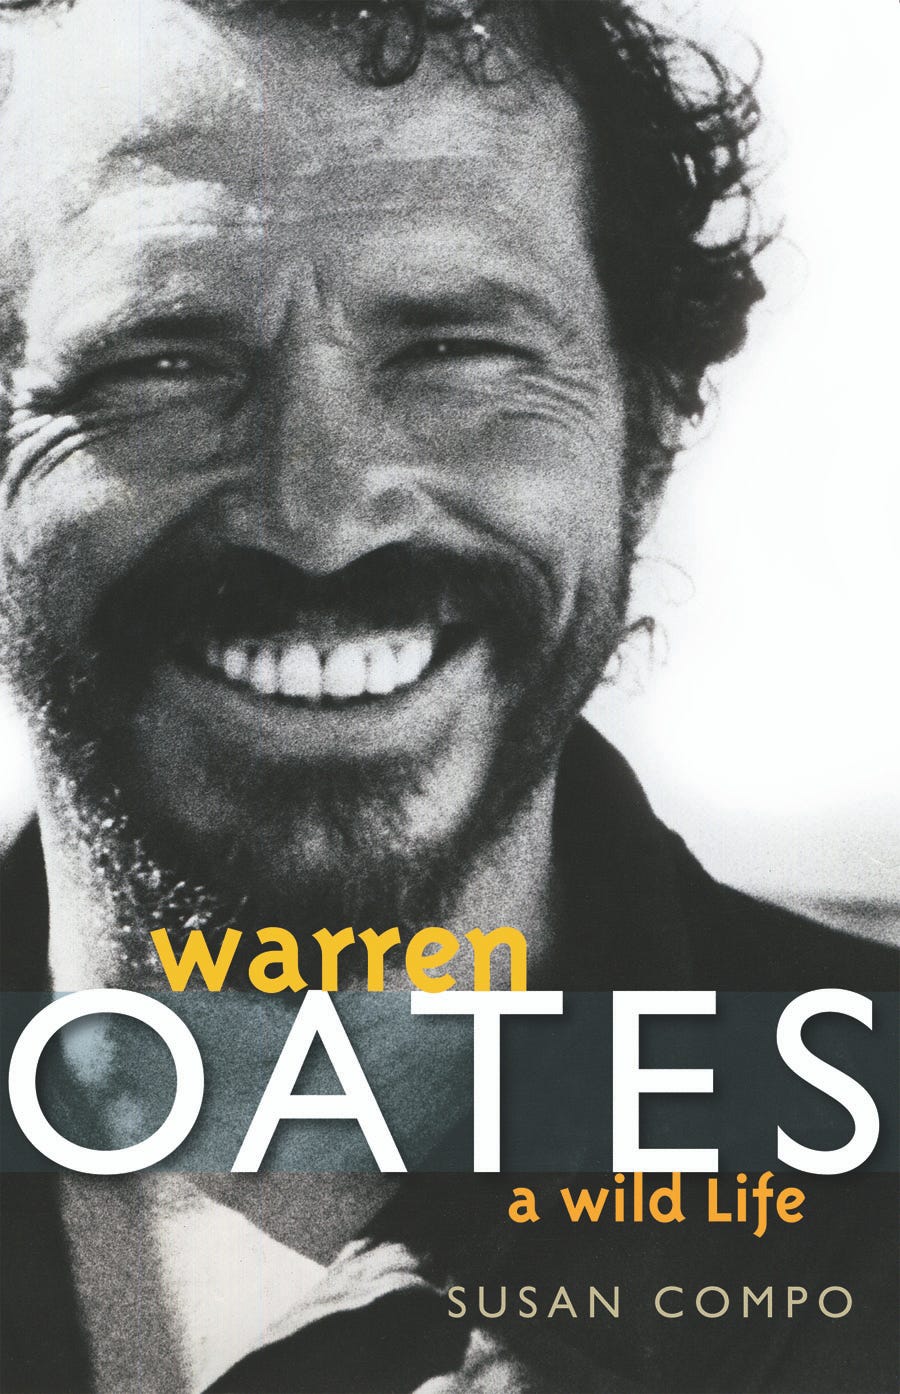 Warren Oates: A Wild Life" biographer Susan Compo exclusively gives an  unflinching account of the late character actor. | Medium